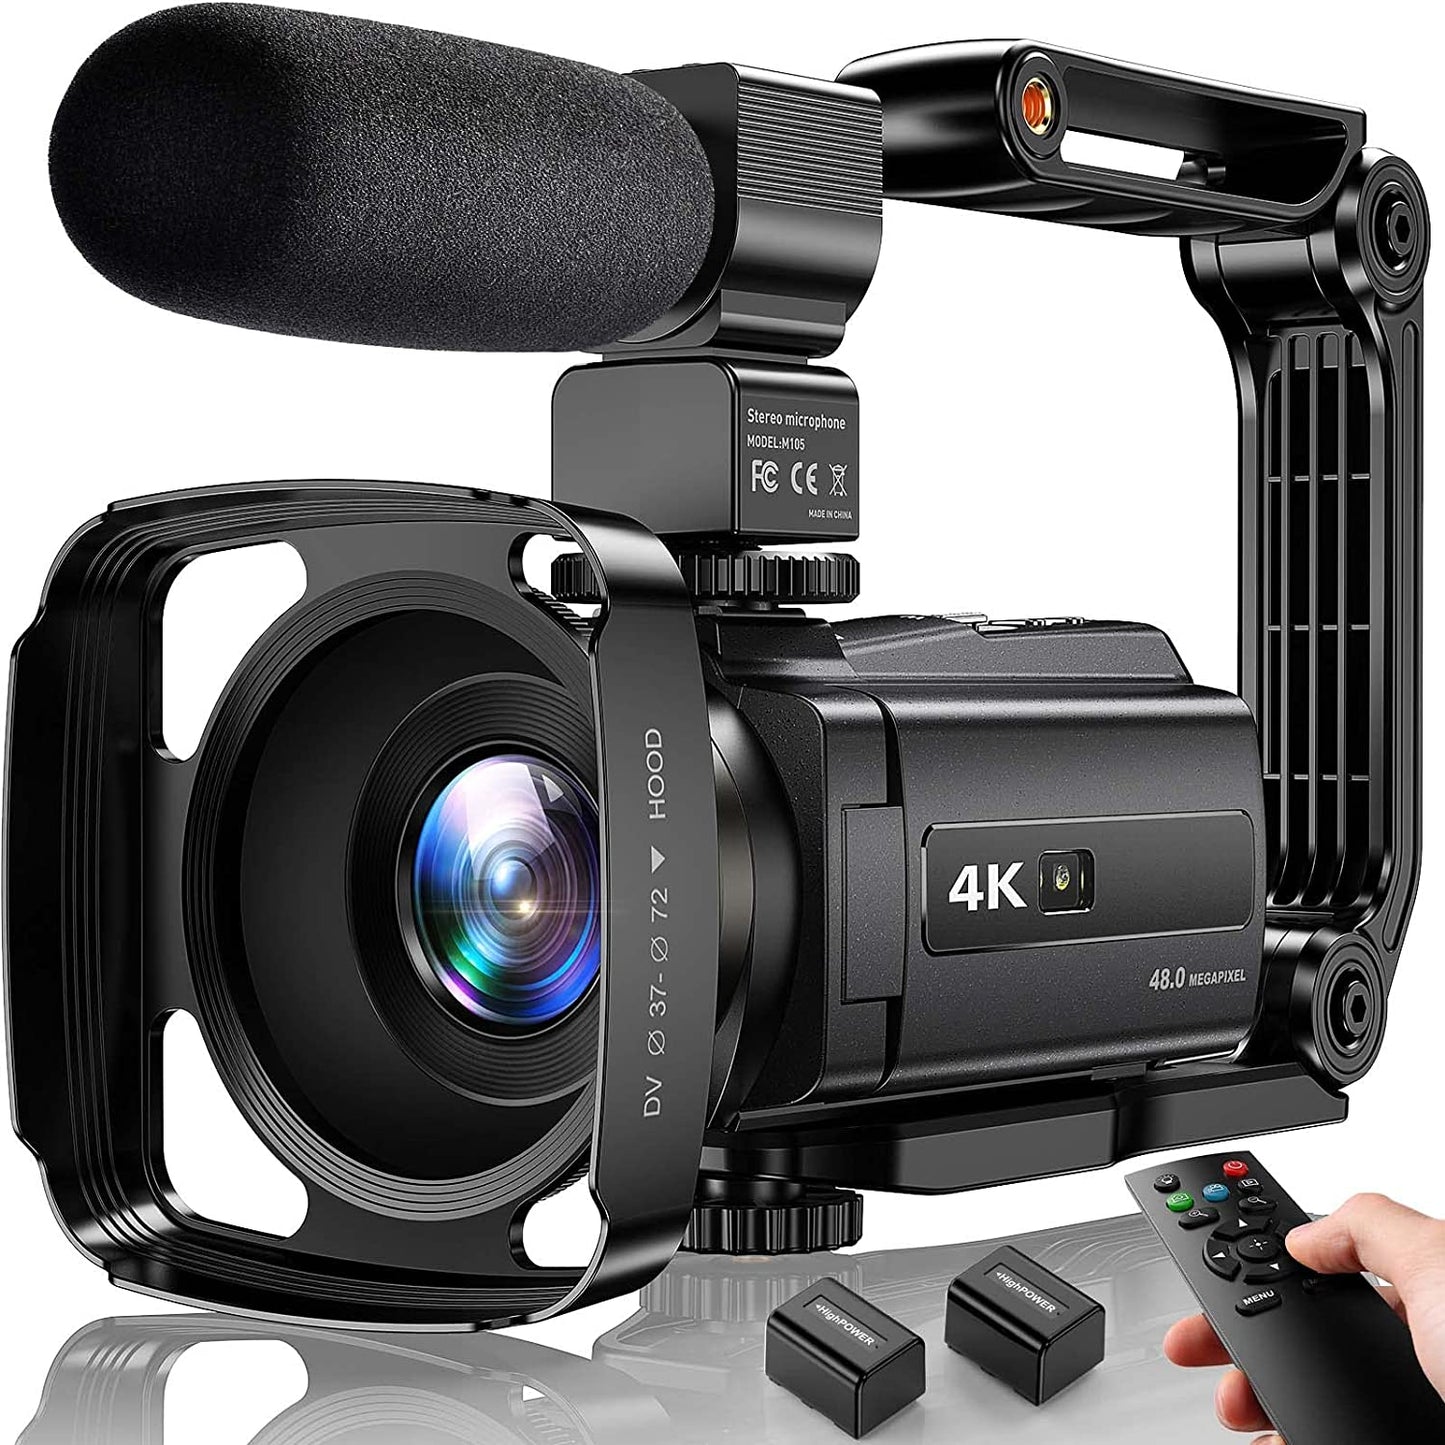 Professional 4K UHD Video Camera Camcorder with Wifi, IR Night Vision, Touch Screen for Recording, 48MP, 16X Digital Zoom, Microphone, Handheld Stabilizer, Lens Hood, Remote Control & 2 Batteries